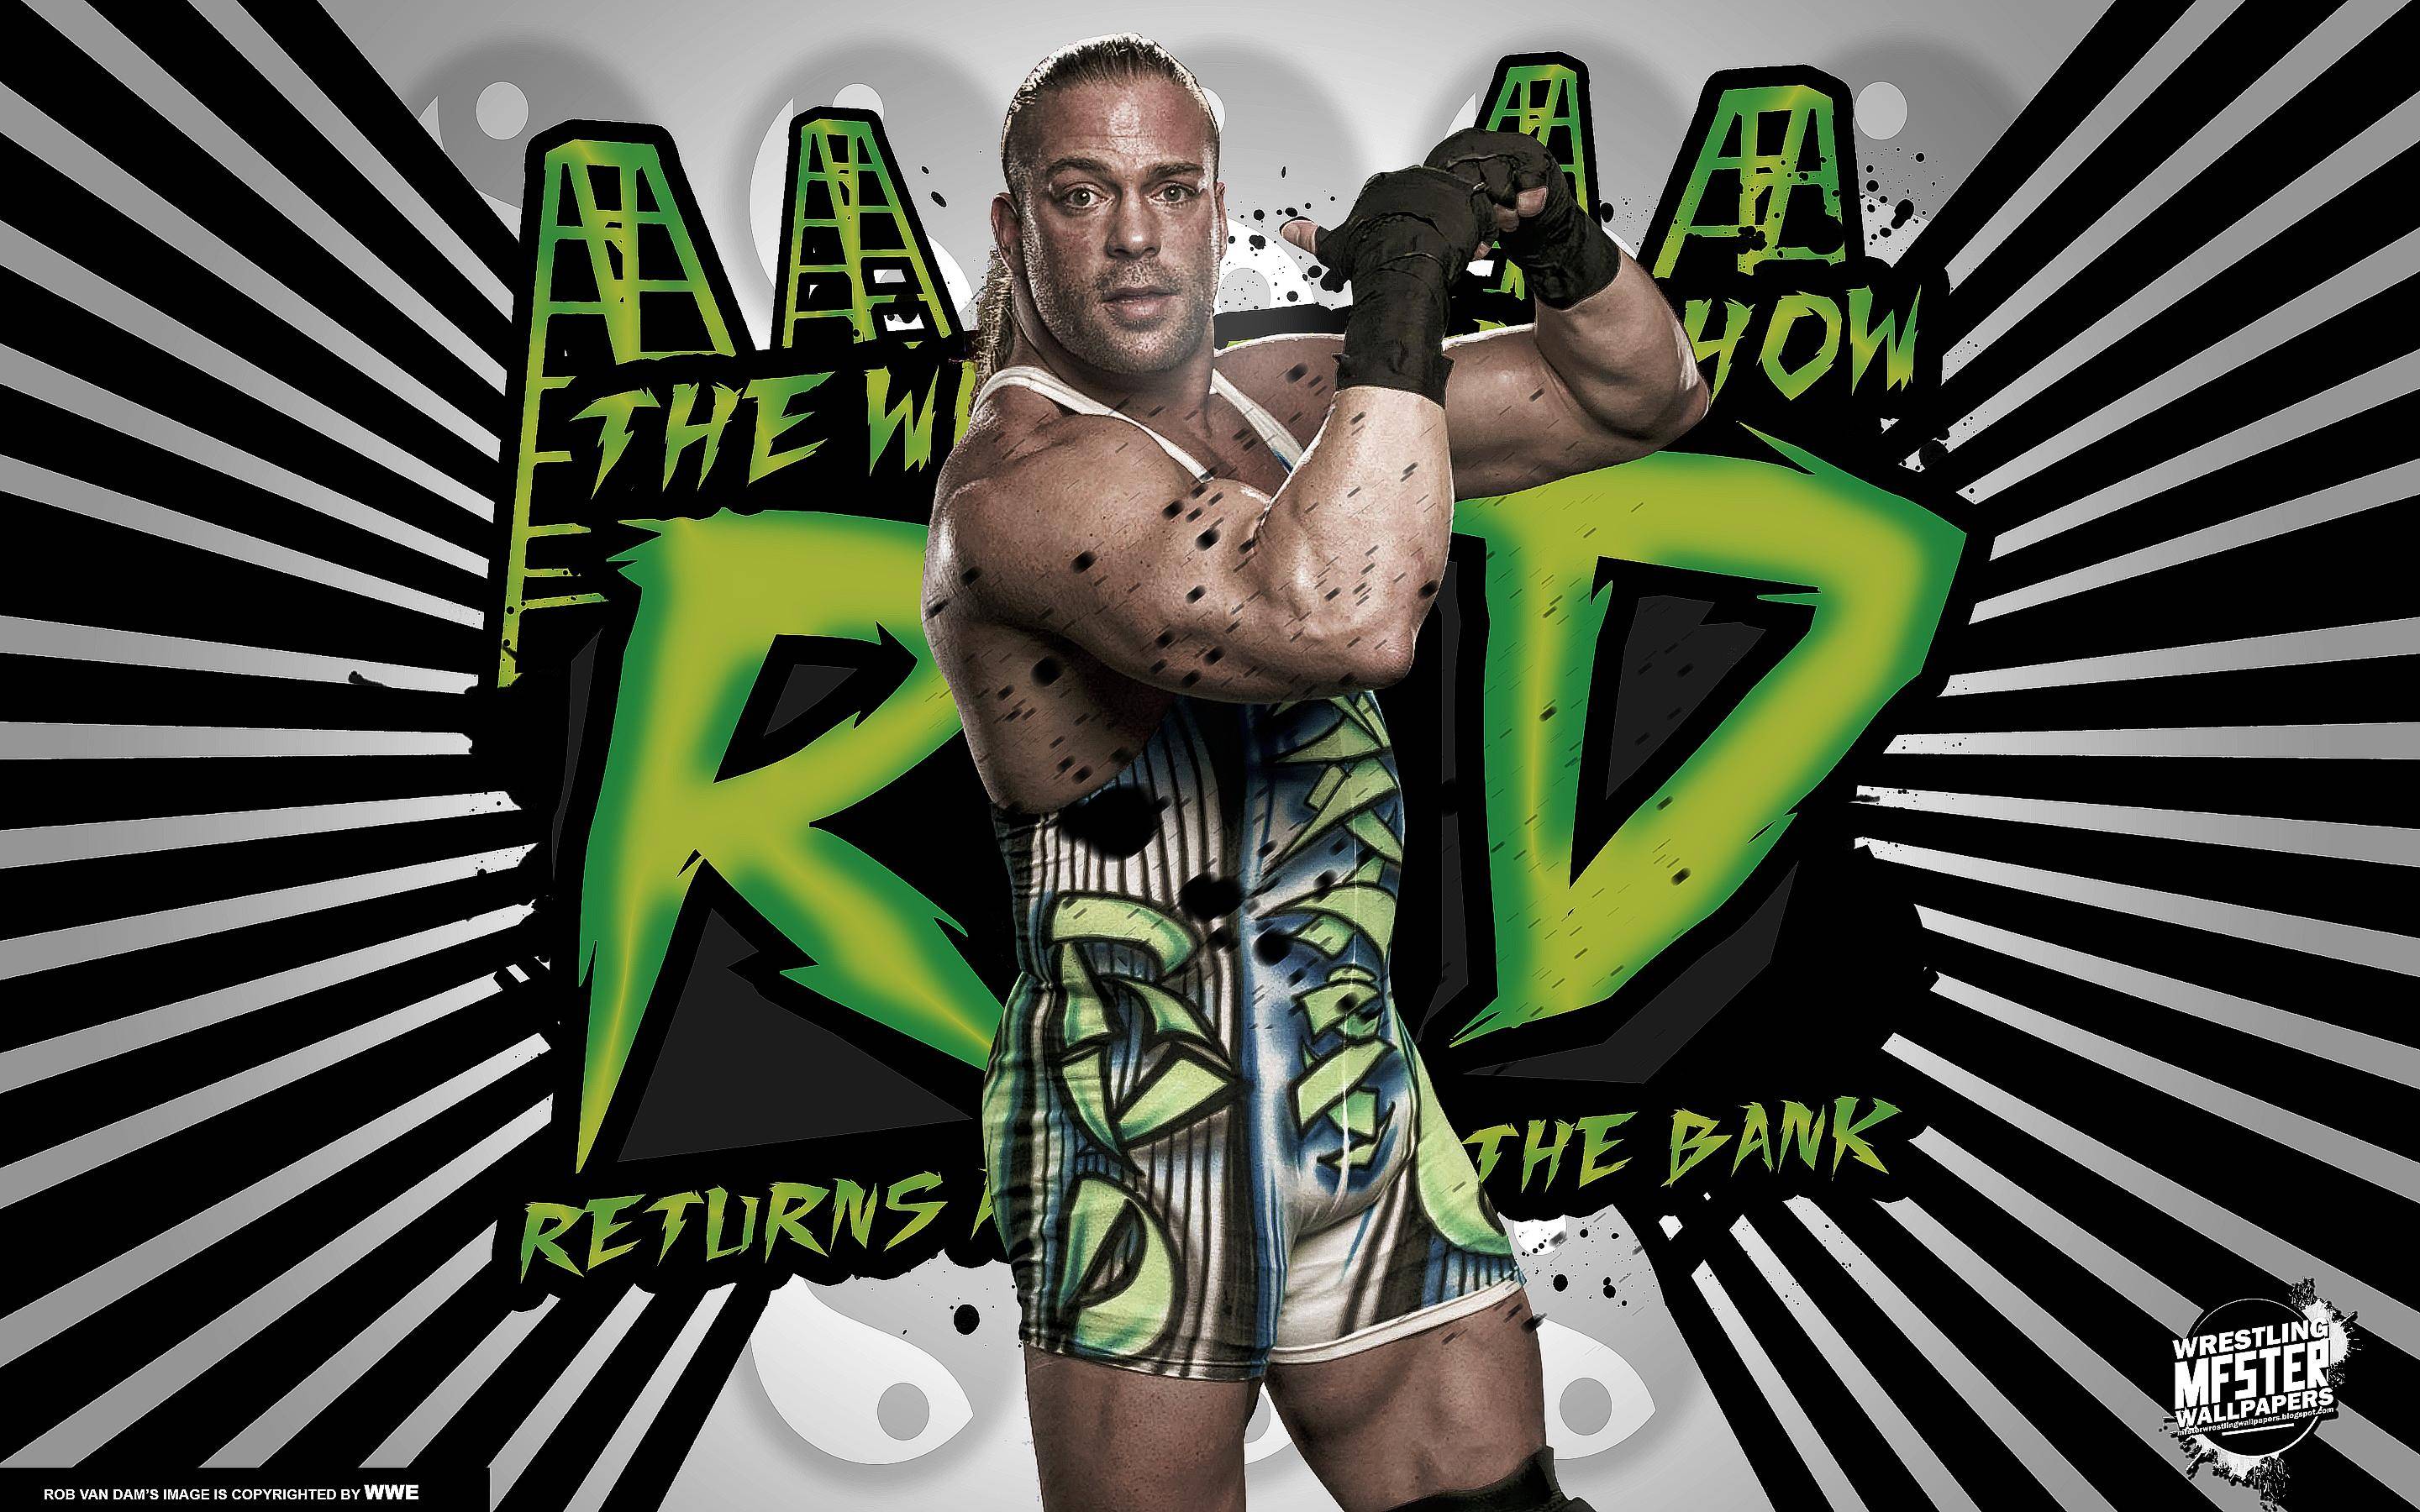 Wallpaper We Made A For Rvd Using His White Attire